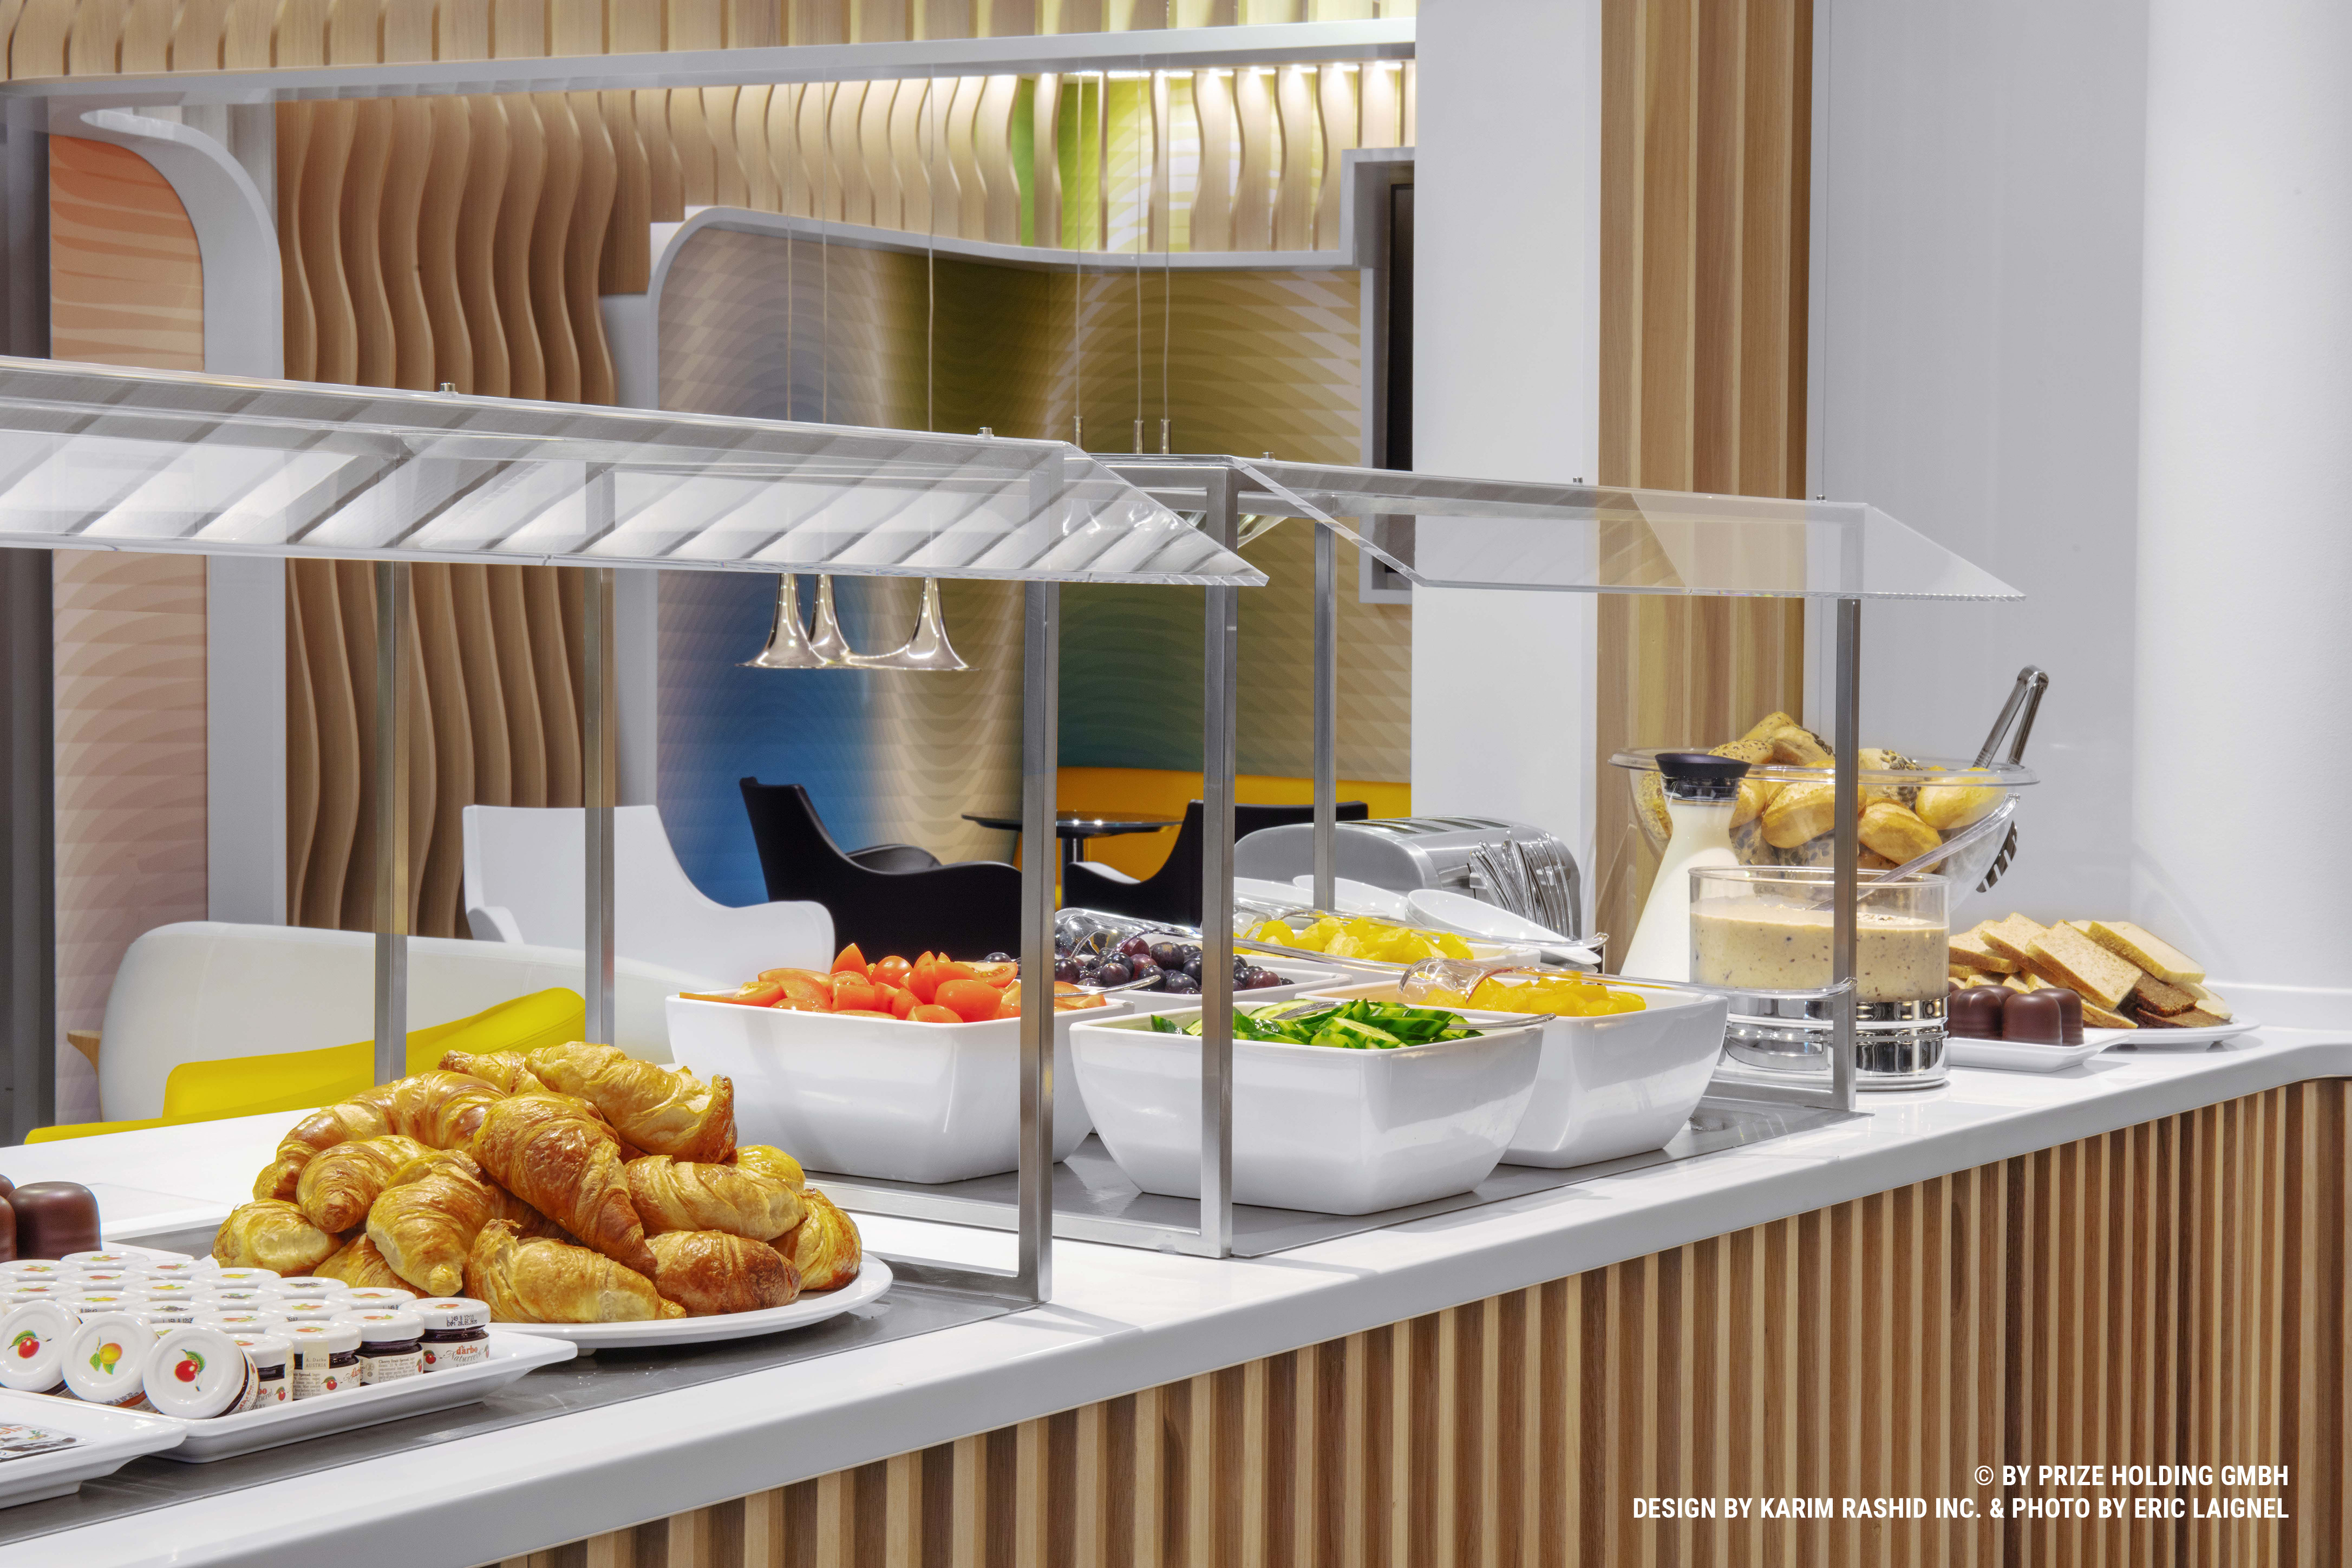 Breakfast buffet in prizeotel Bremen-City with raw vegetables, croissants and sweets